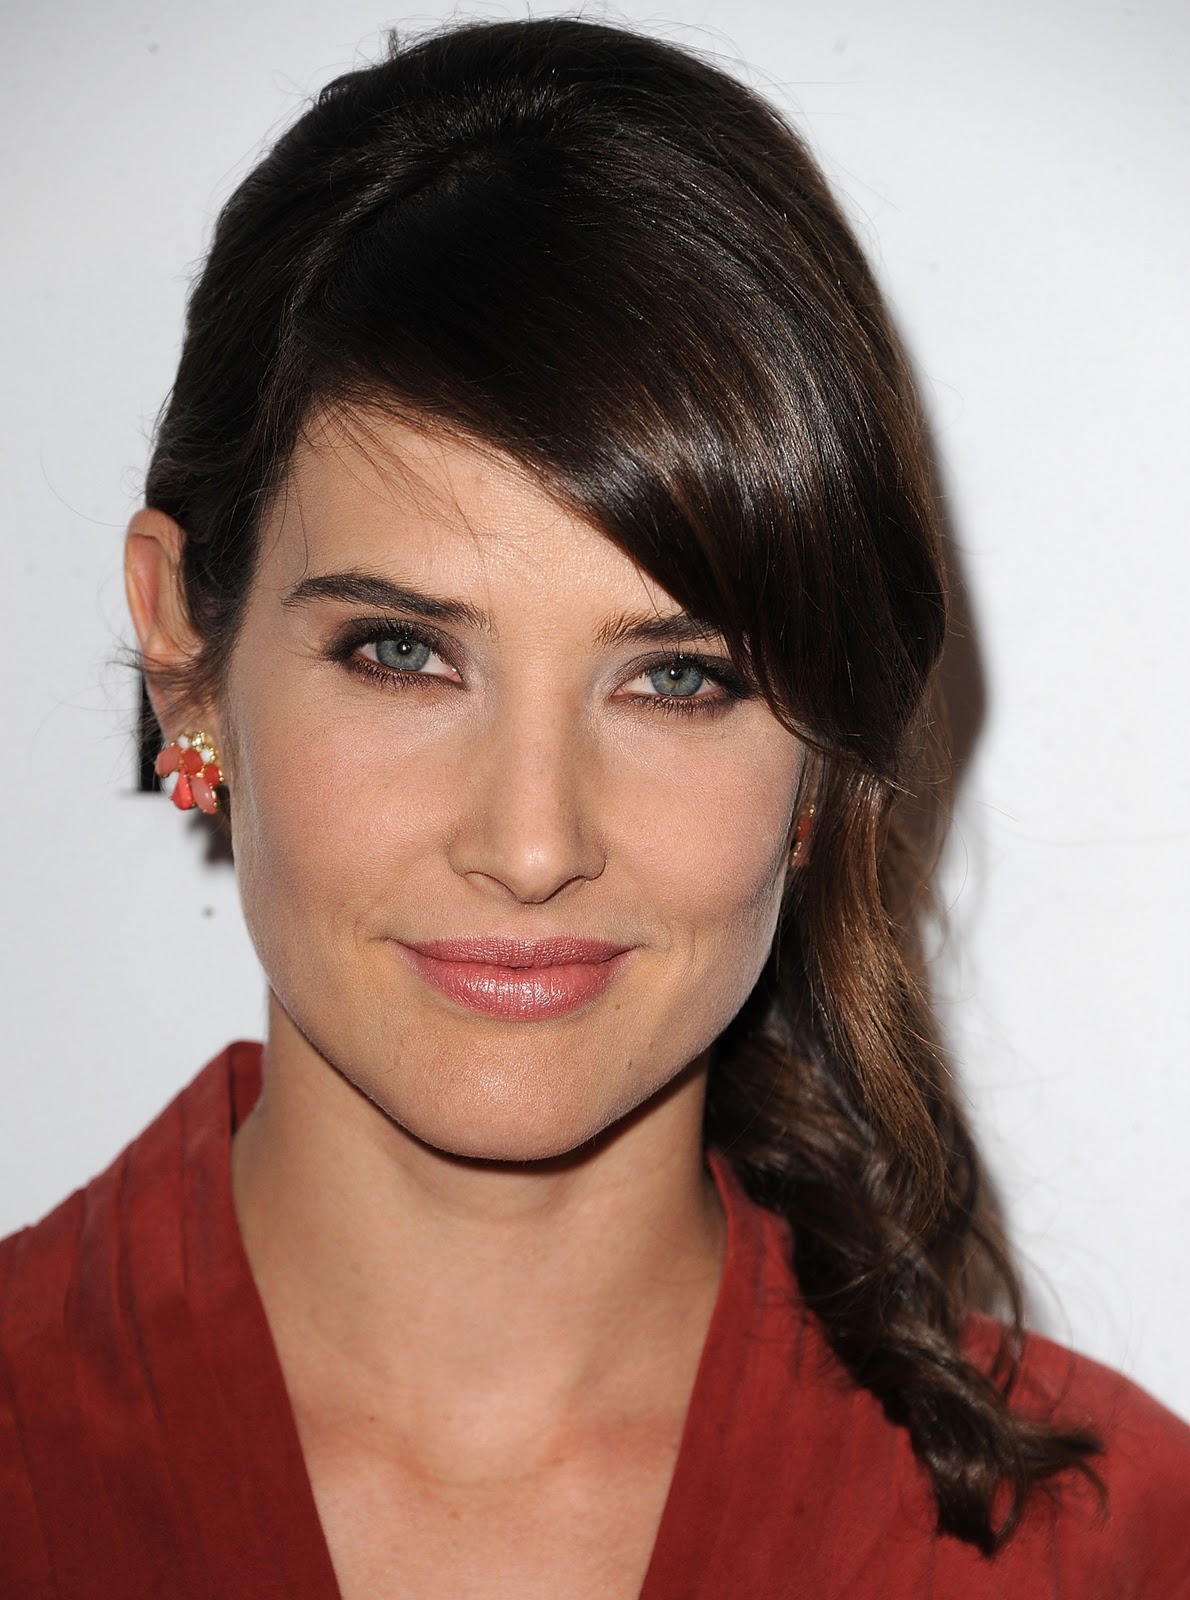 Image Gallary 5 Cobie Smulders Pictures